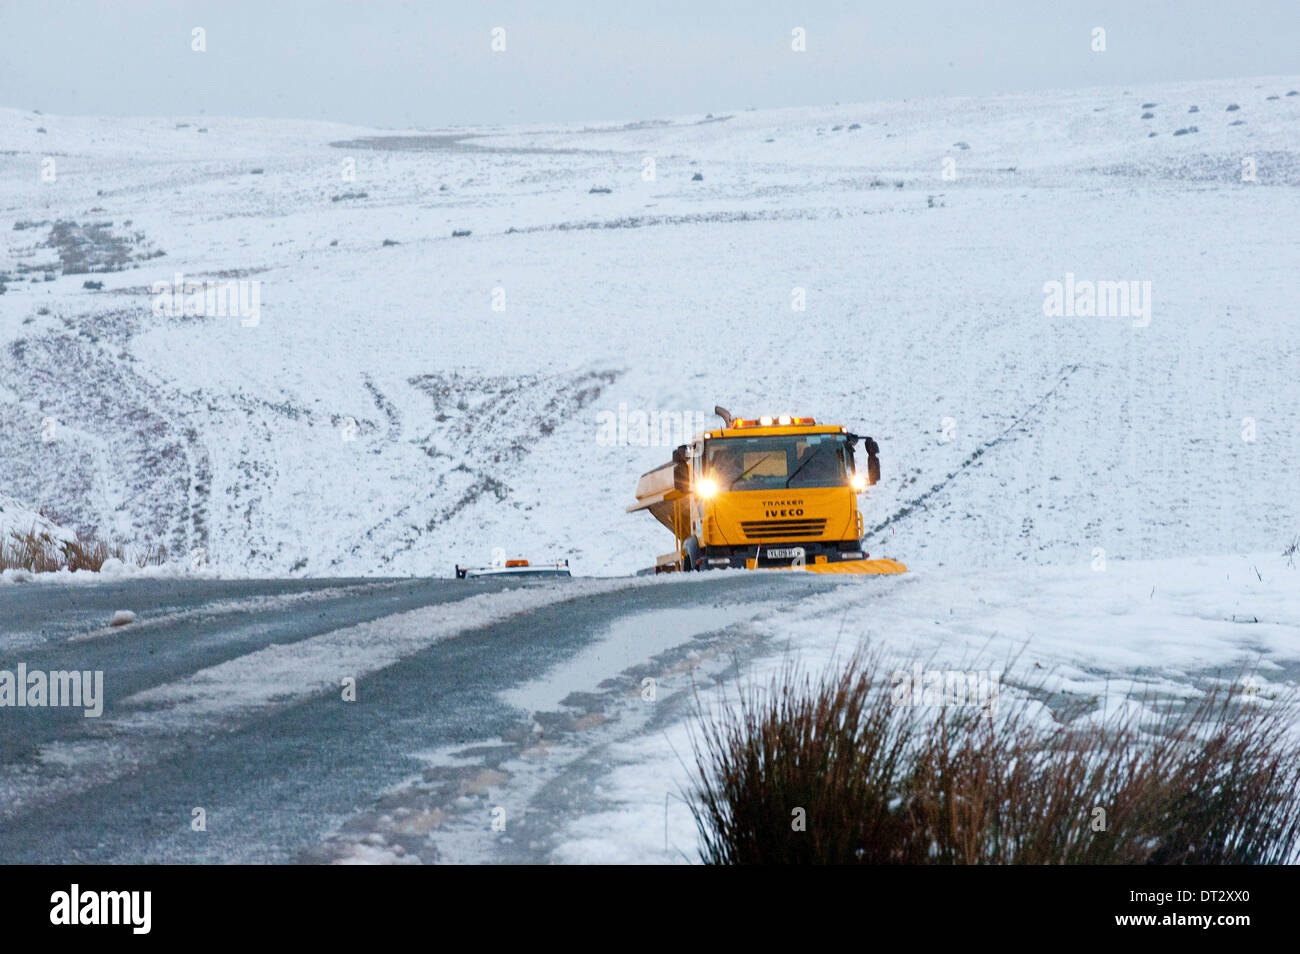 Mynydd Epynt, Powys, Wales, UK. 7th February 2014. Gritting trucks are out early on the road between Builth Wells and Brecon. Snow fell last night on high land in Mid-Wales. Credit:  Graham M. Lawrence/Alamy Live News. Stock Photo